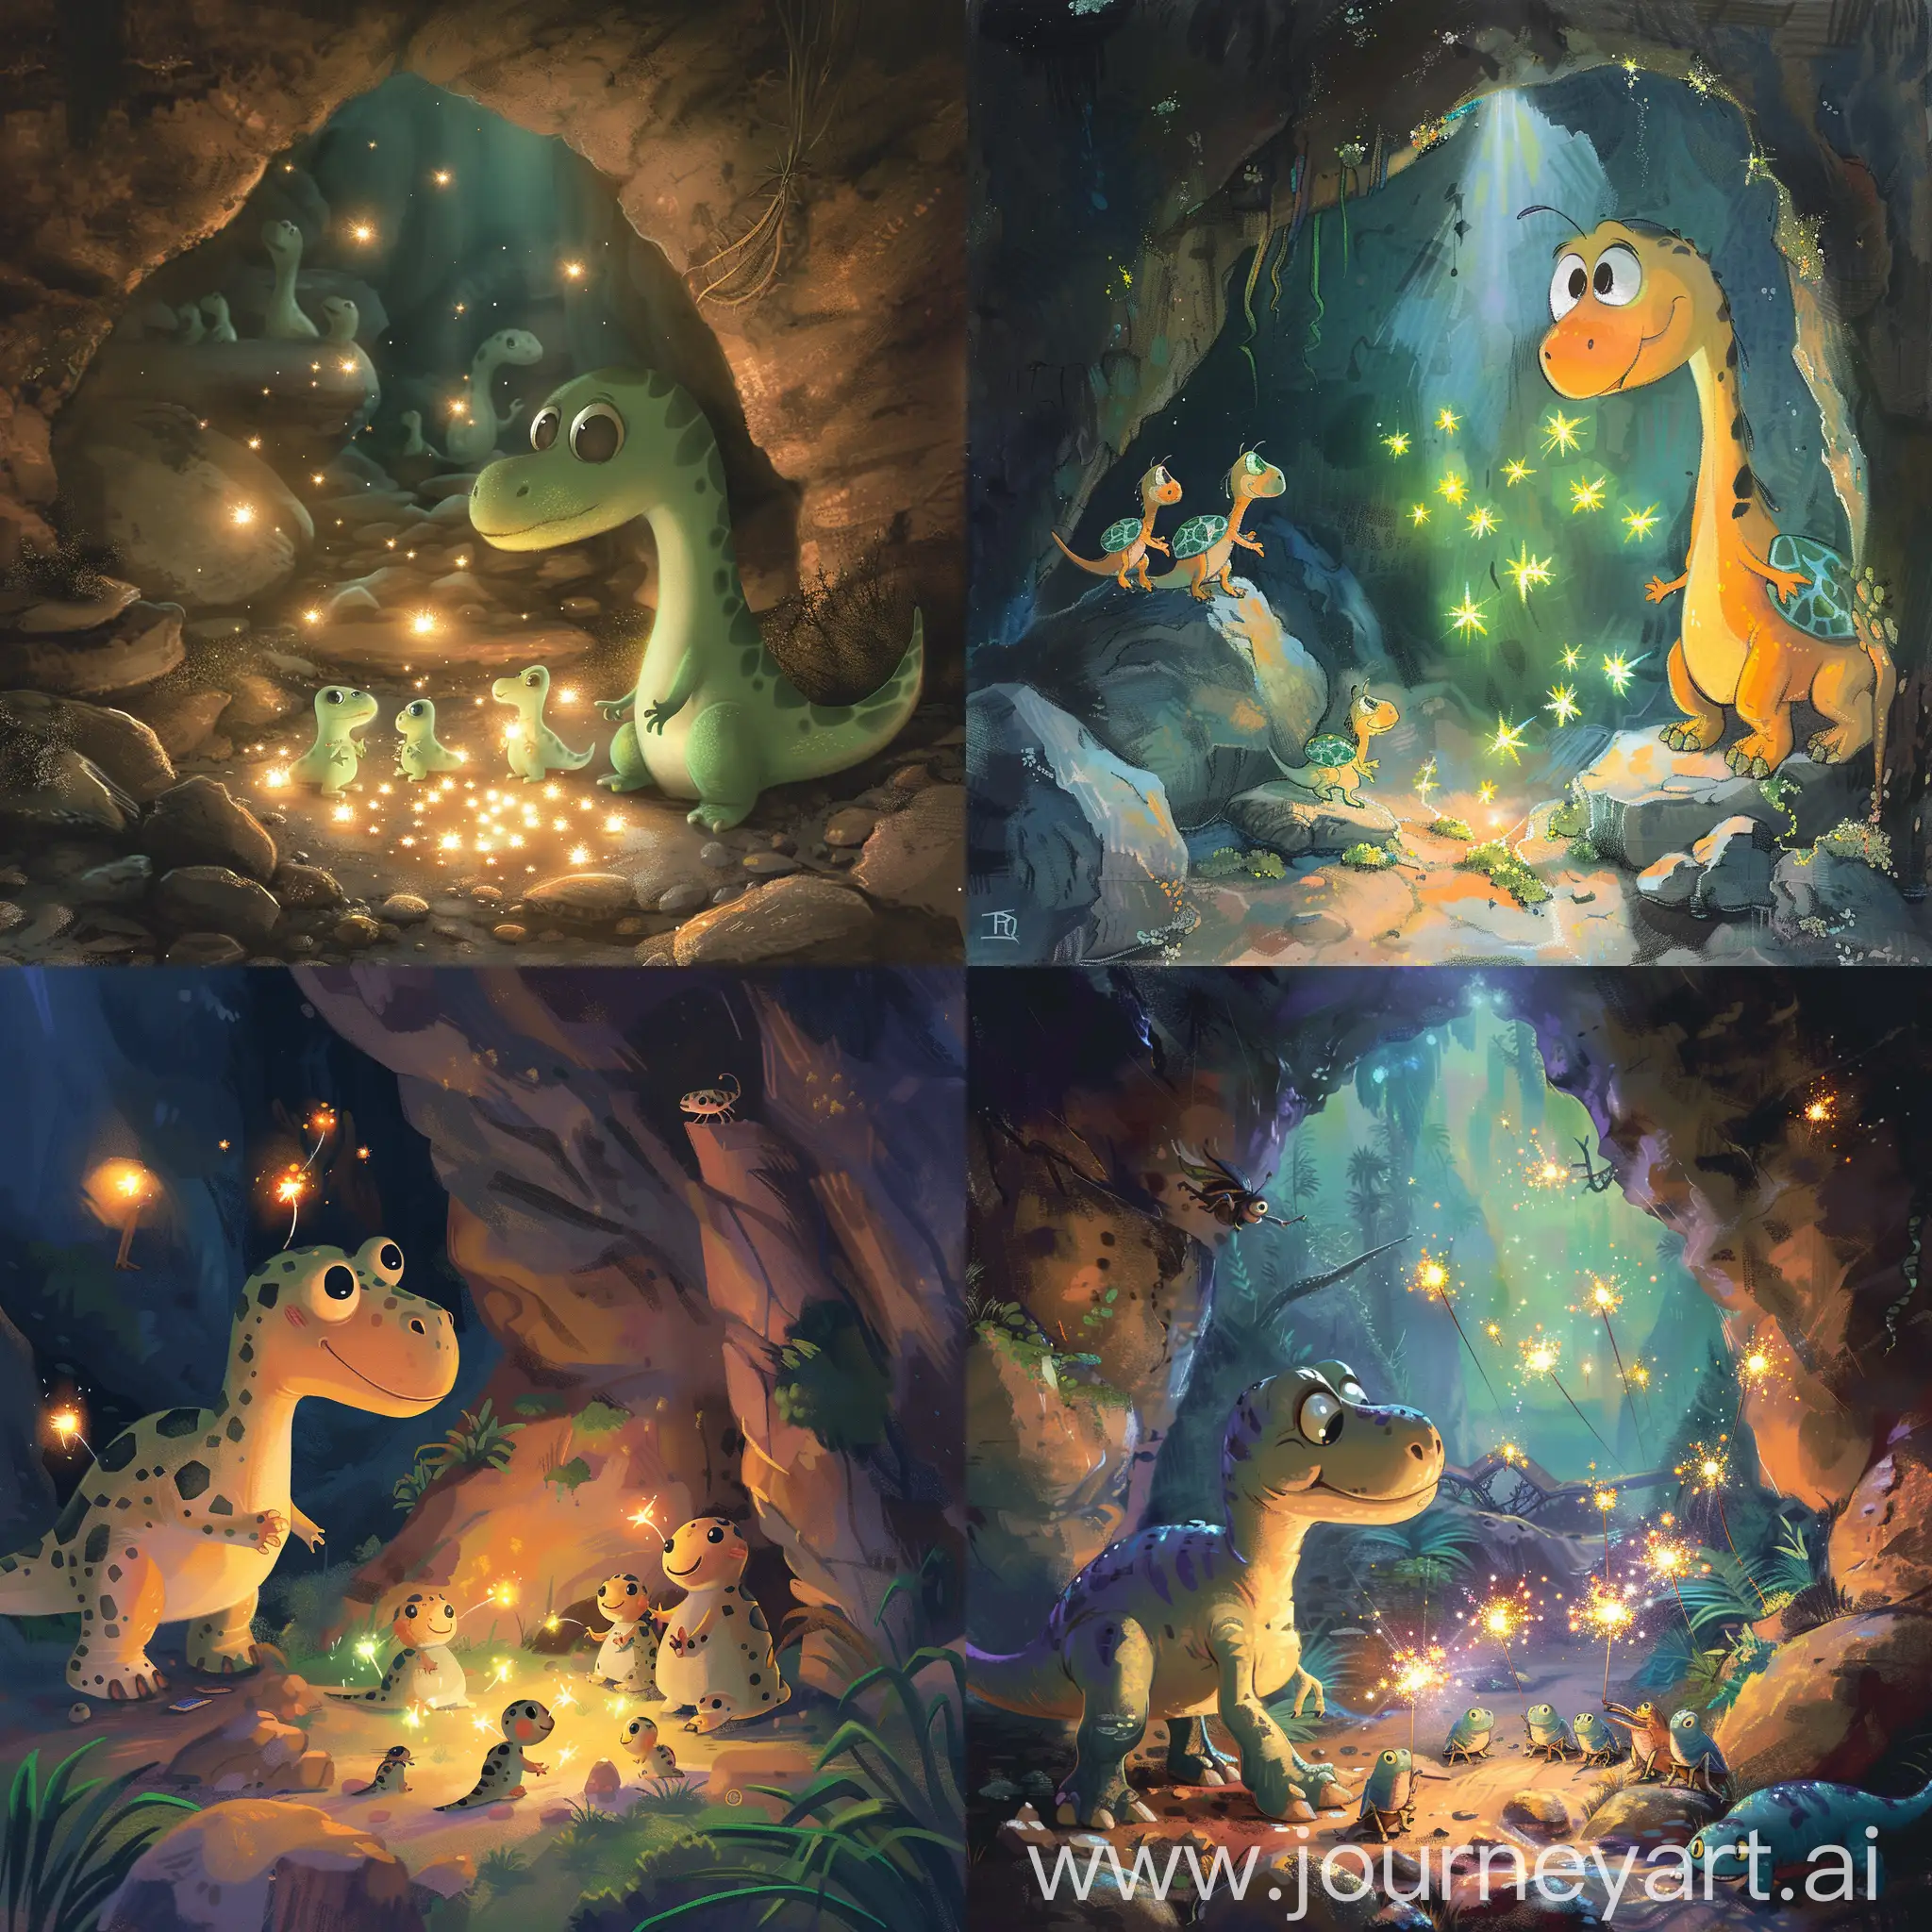 / imagine prompt Dino's adventure with the sparklebugs, a family of tiny creatures living in a cave